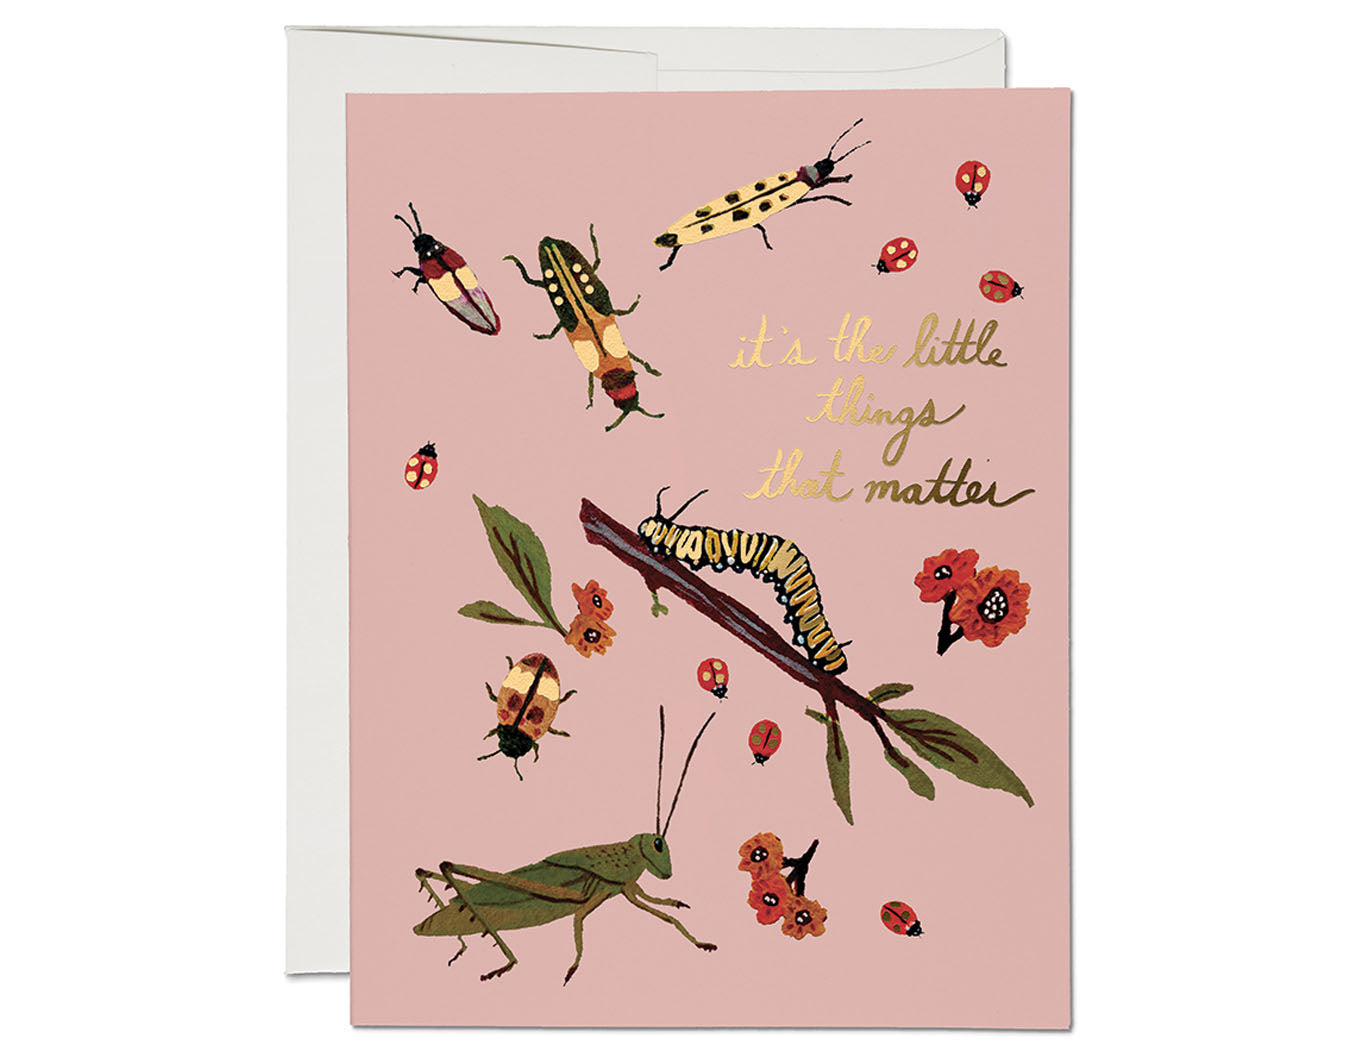 pale pink background gold foil text it's the little things that matter illustrated insects and twig